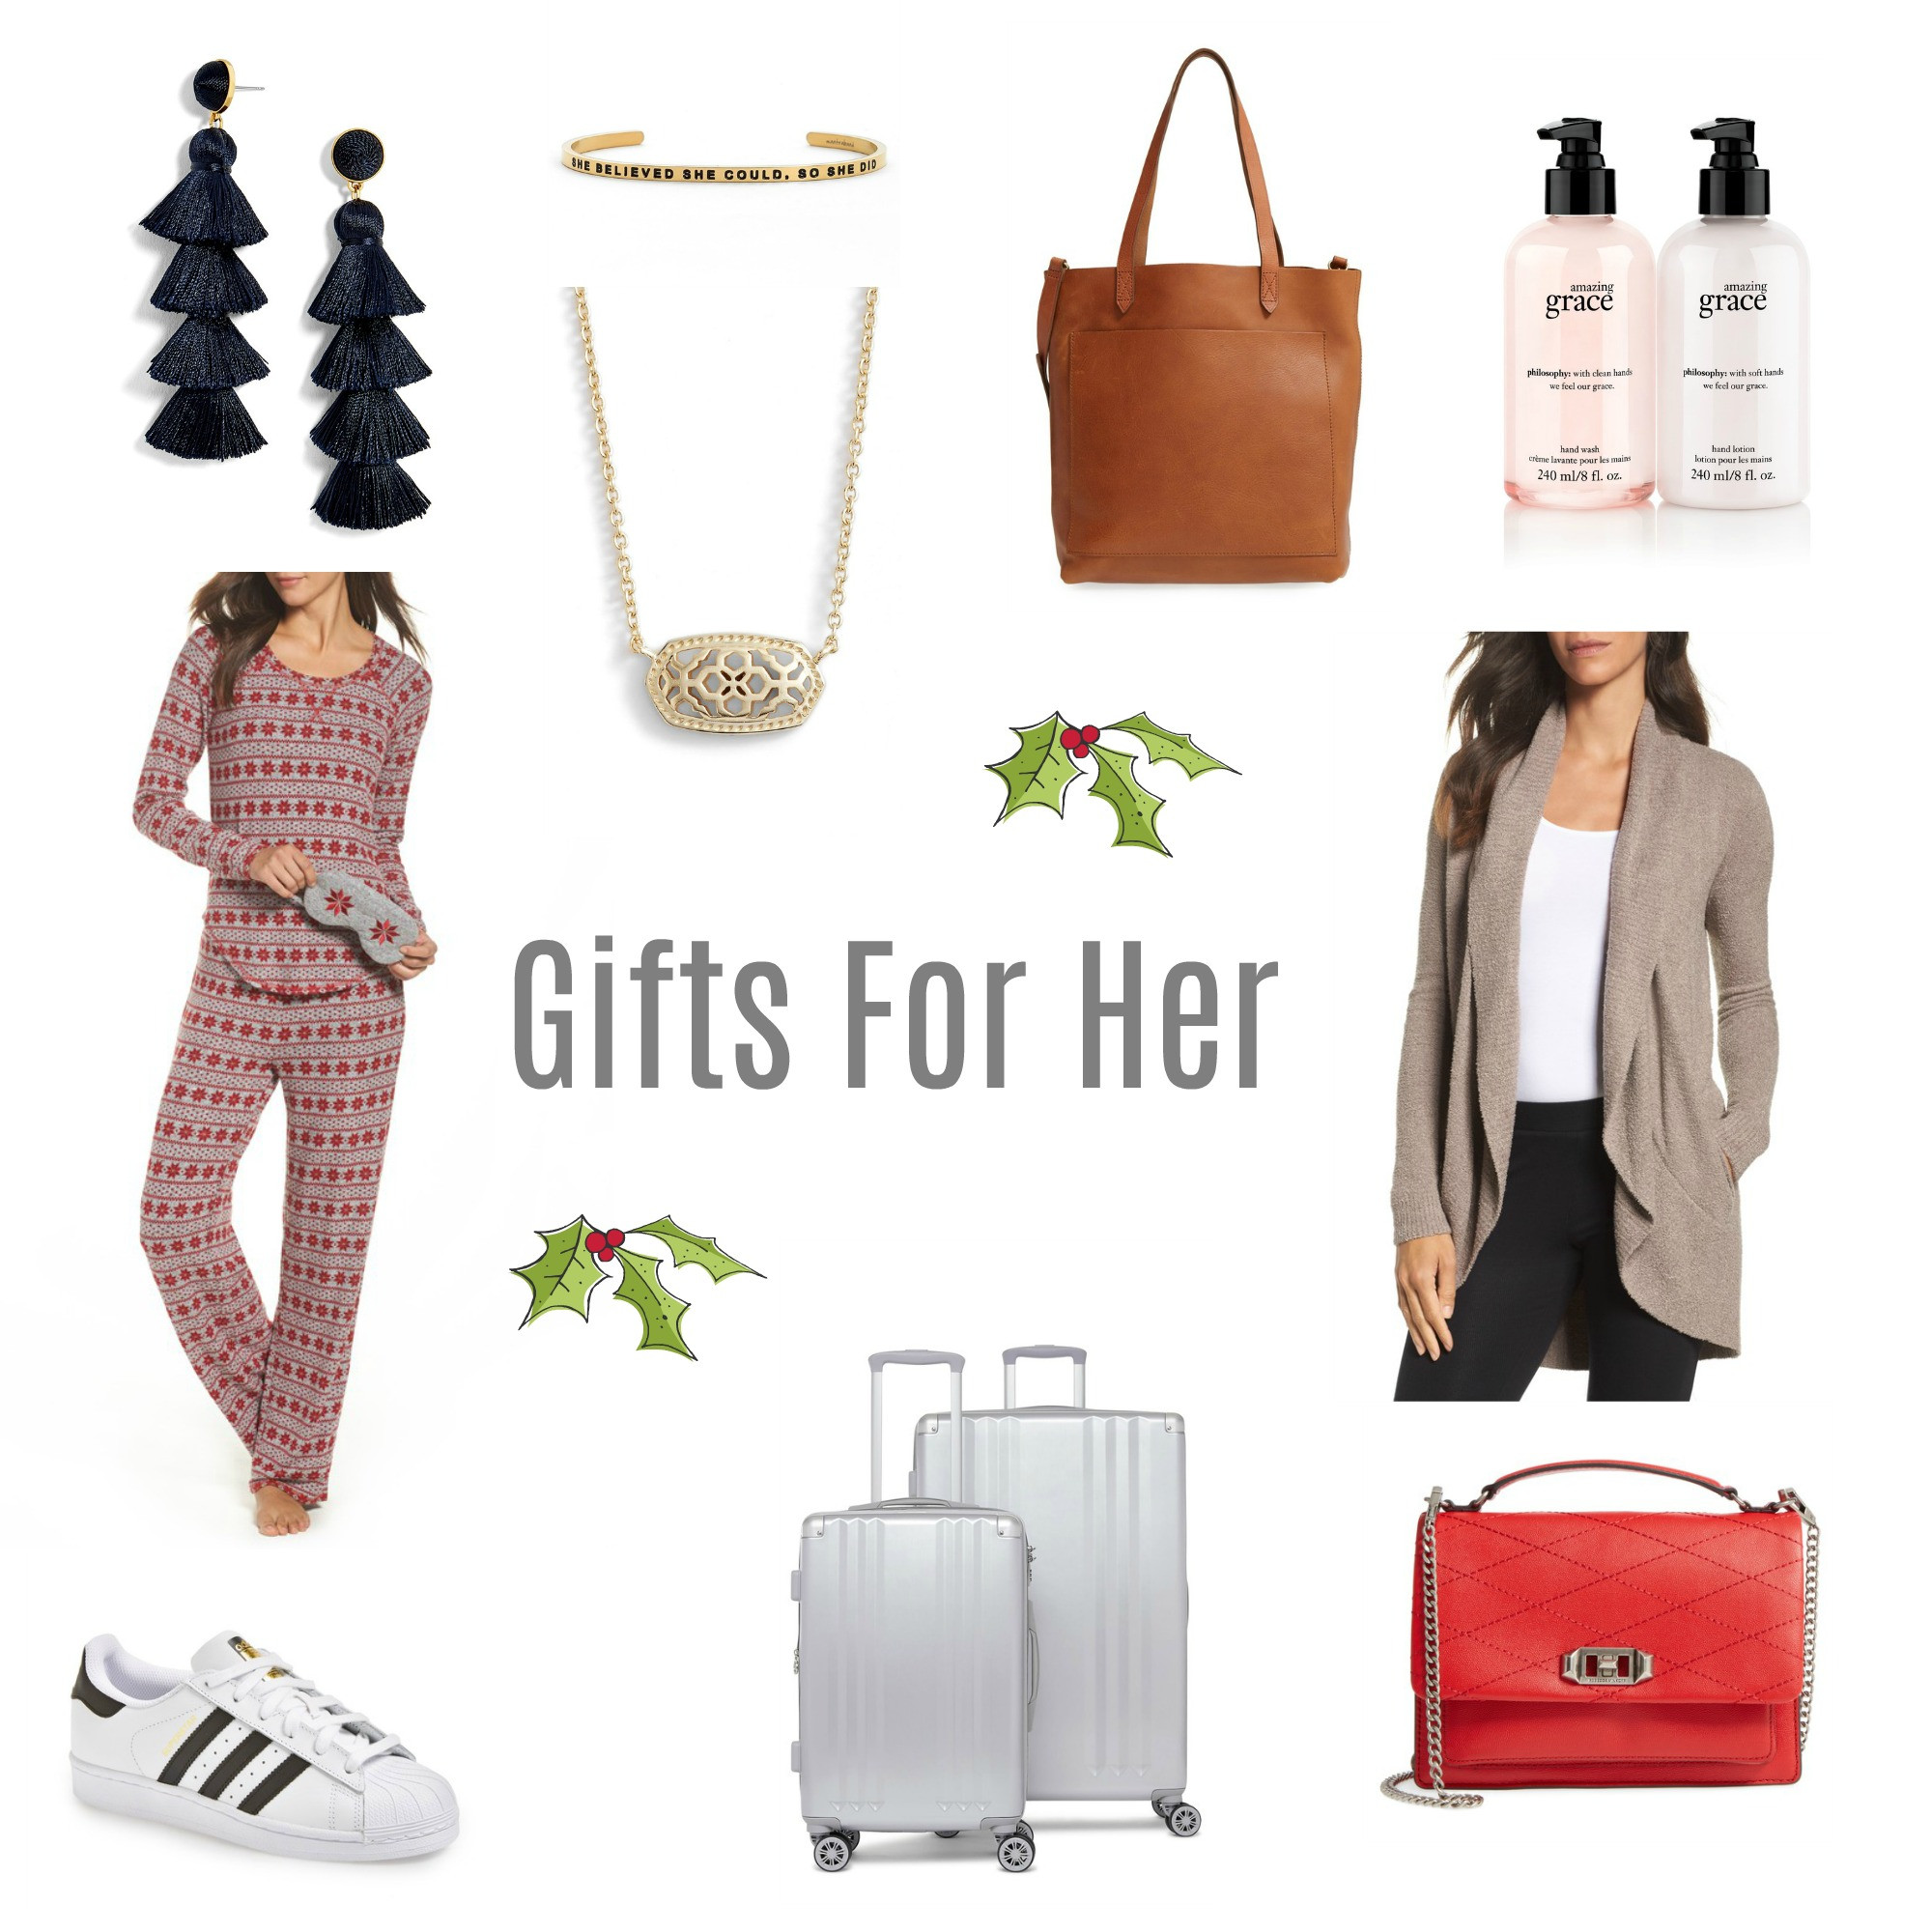 Winter Gifts For Her
 25 Days of Winter Fashion Sequins Gifts For Her from